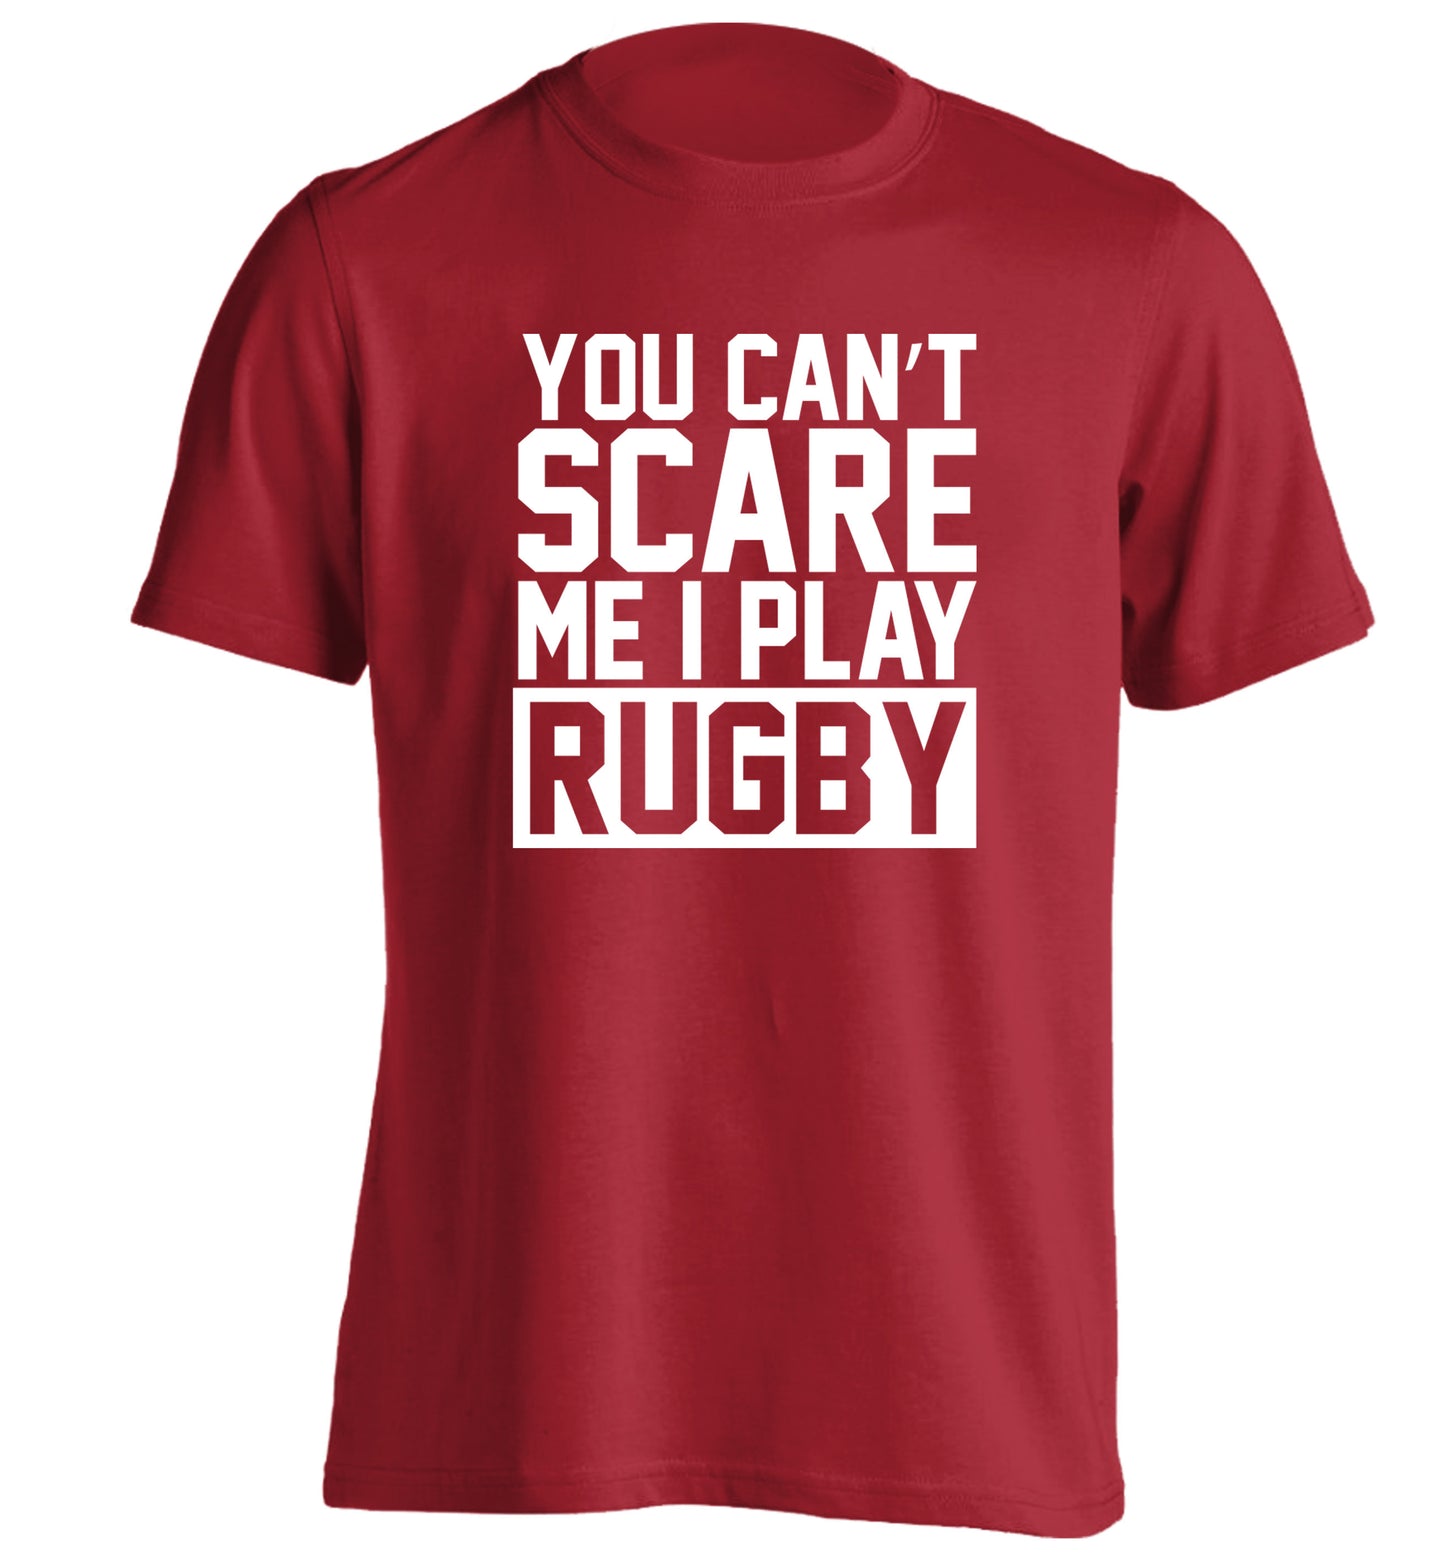 You can't scare me I play rugby adults unisex red Tshirt 2XL